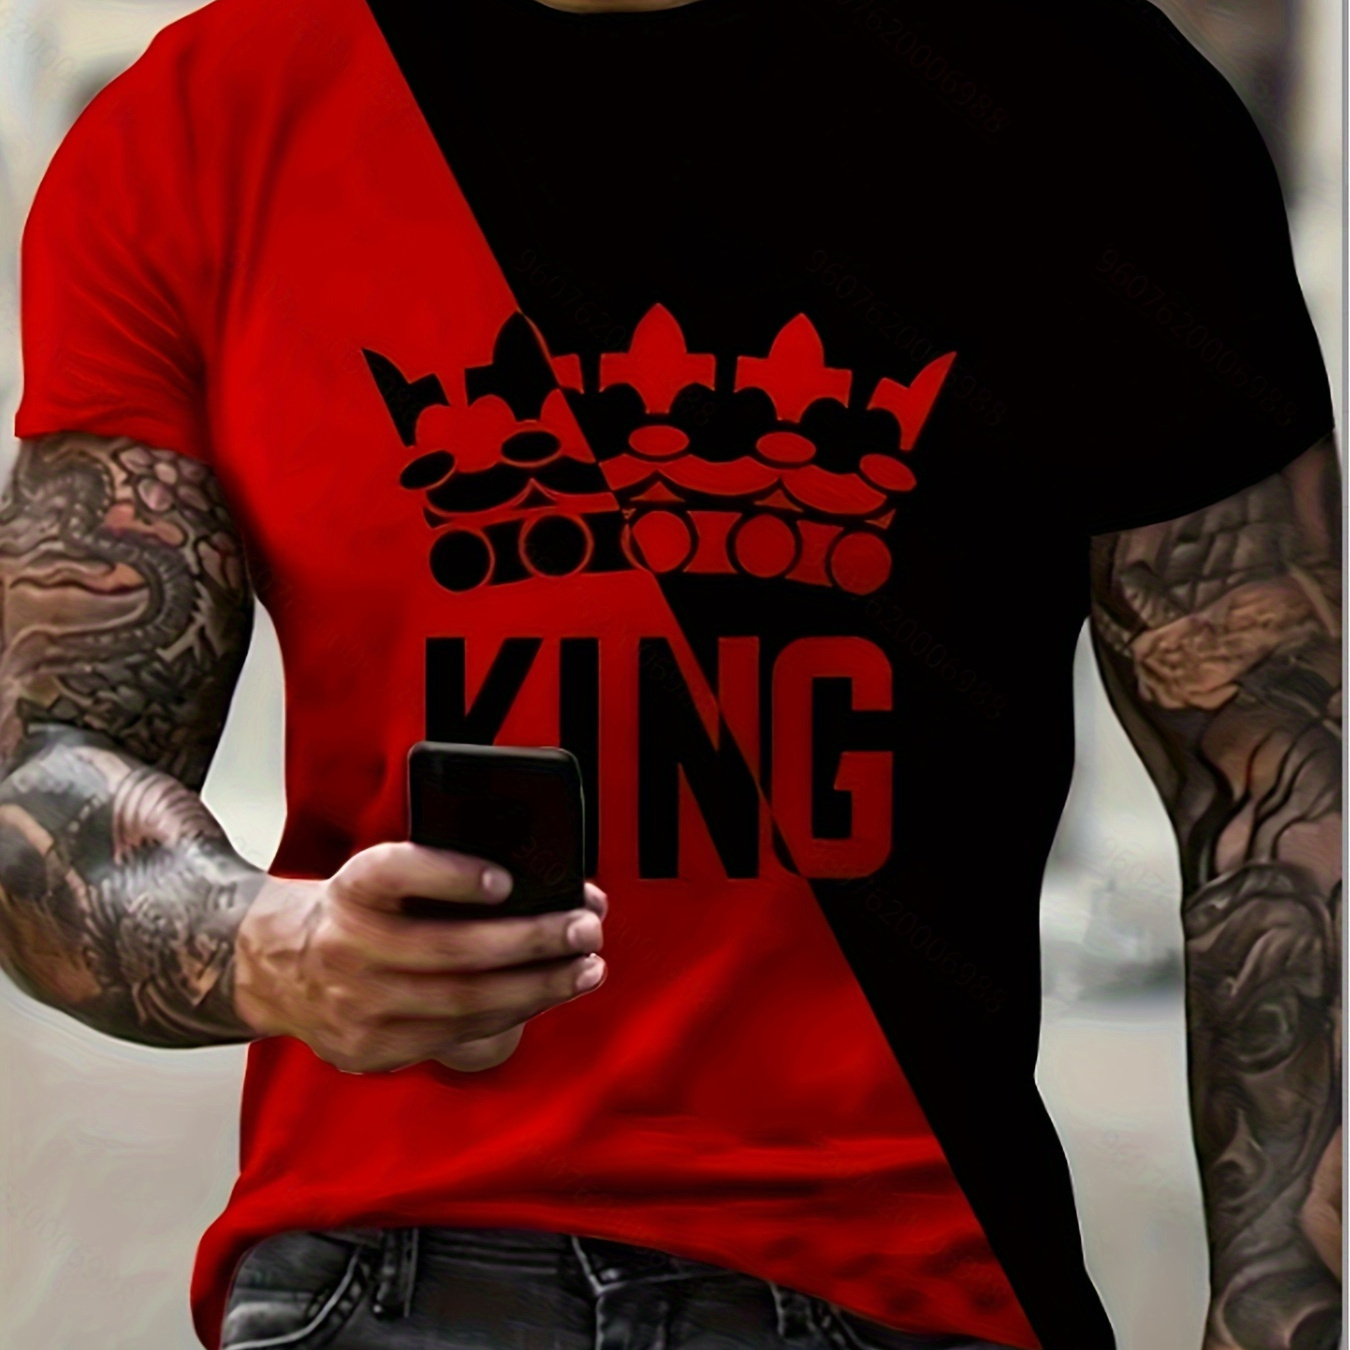 

Men's Stylish King Pattern Shirt, Casual Slightly Stretch Breathable Crew Neck Short Sleeve Tee Top For City Walk Street Hanging Outdoor Activities